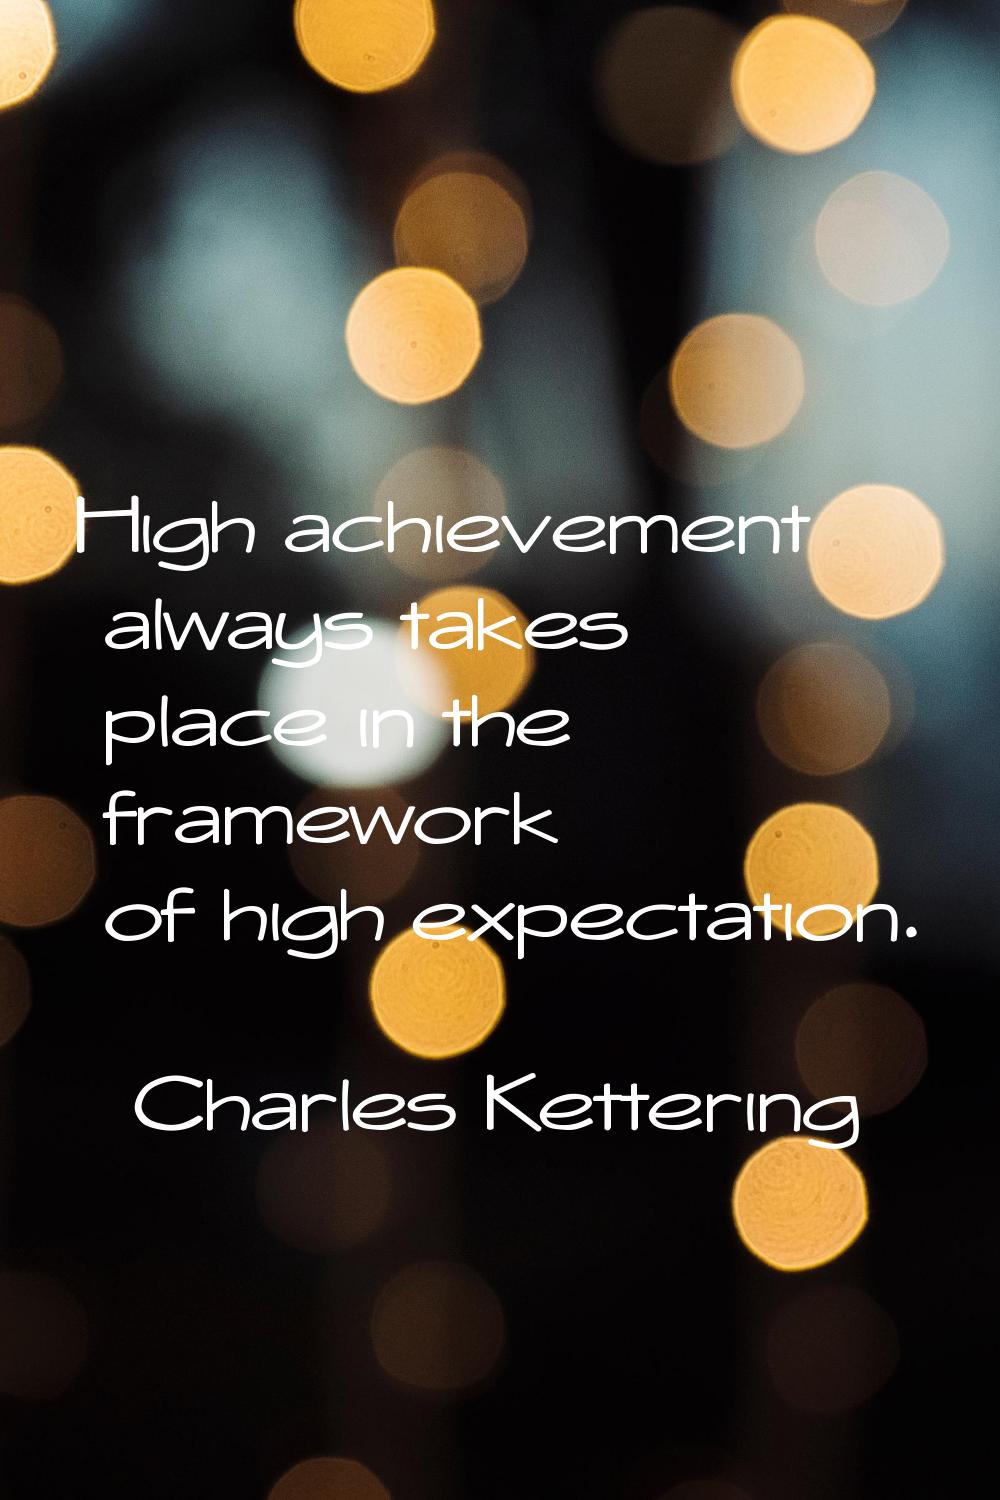 High achievement always takes place in the framework of high expectation.